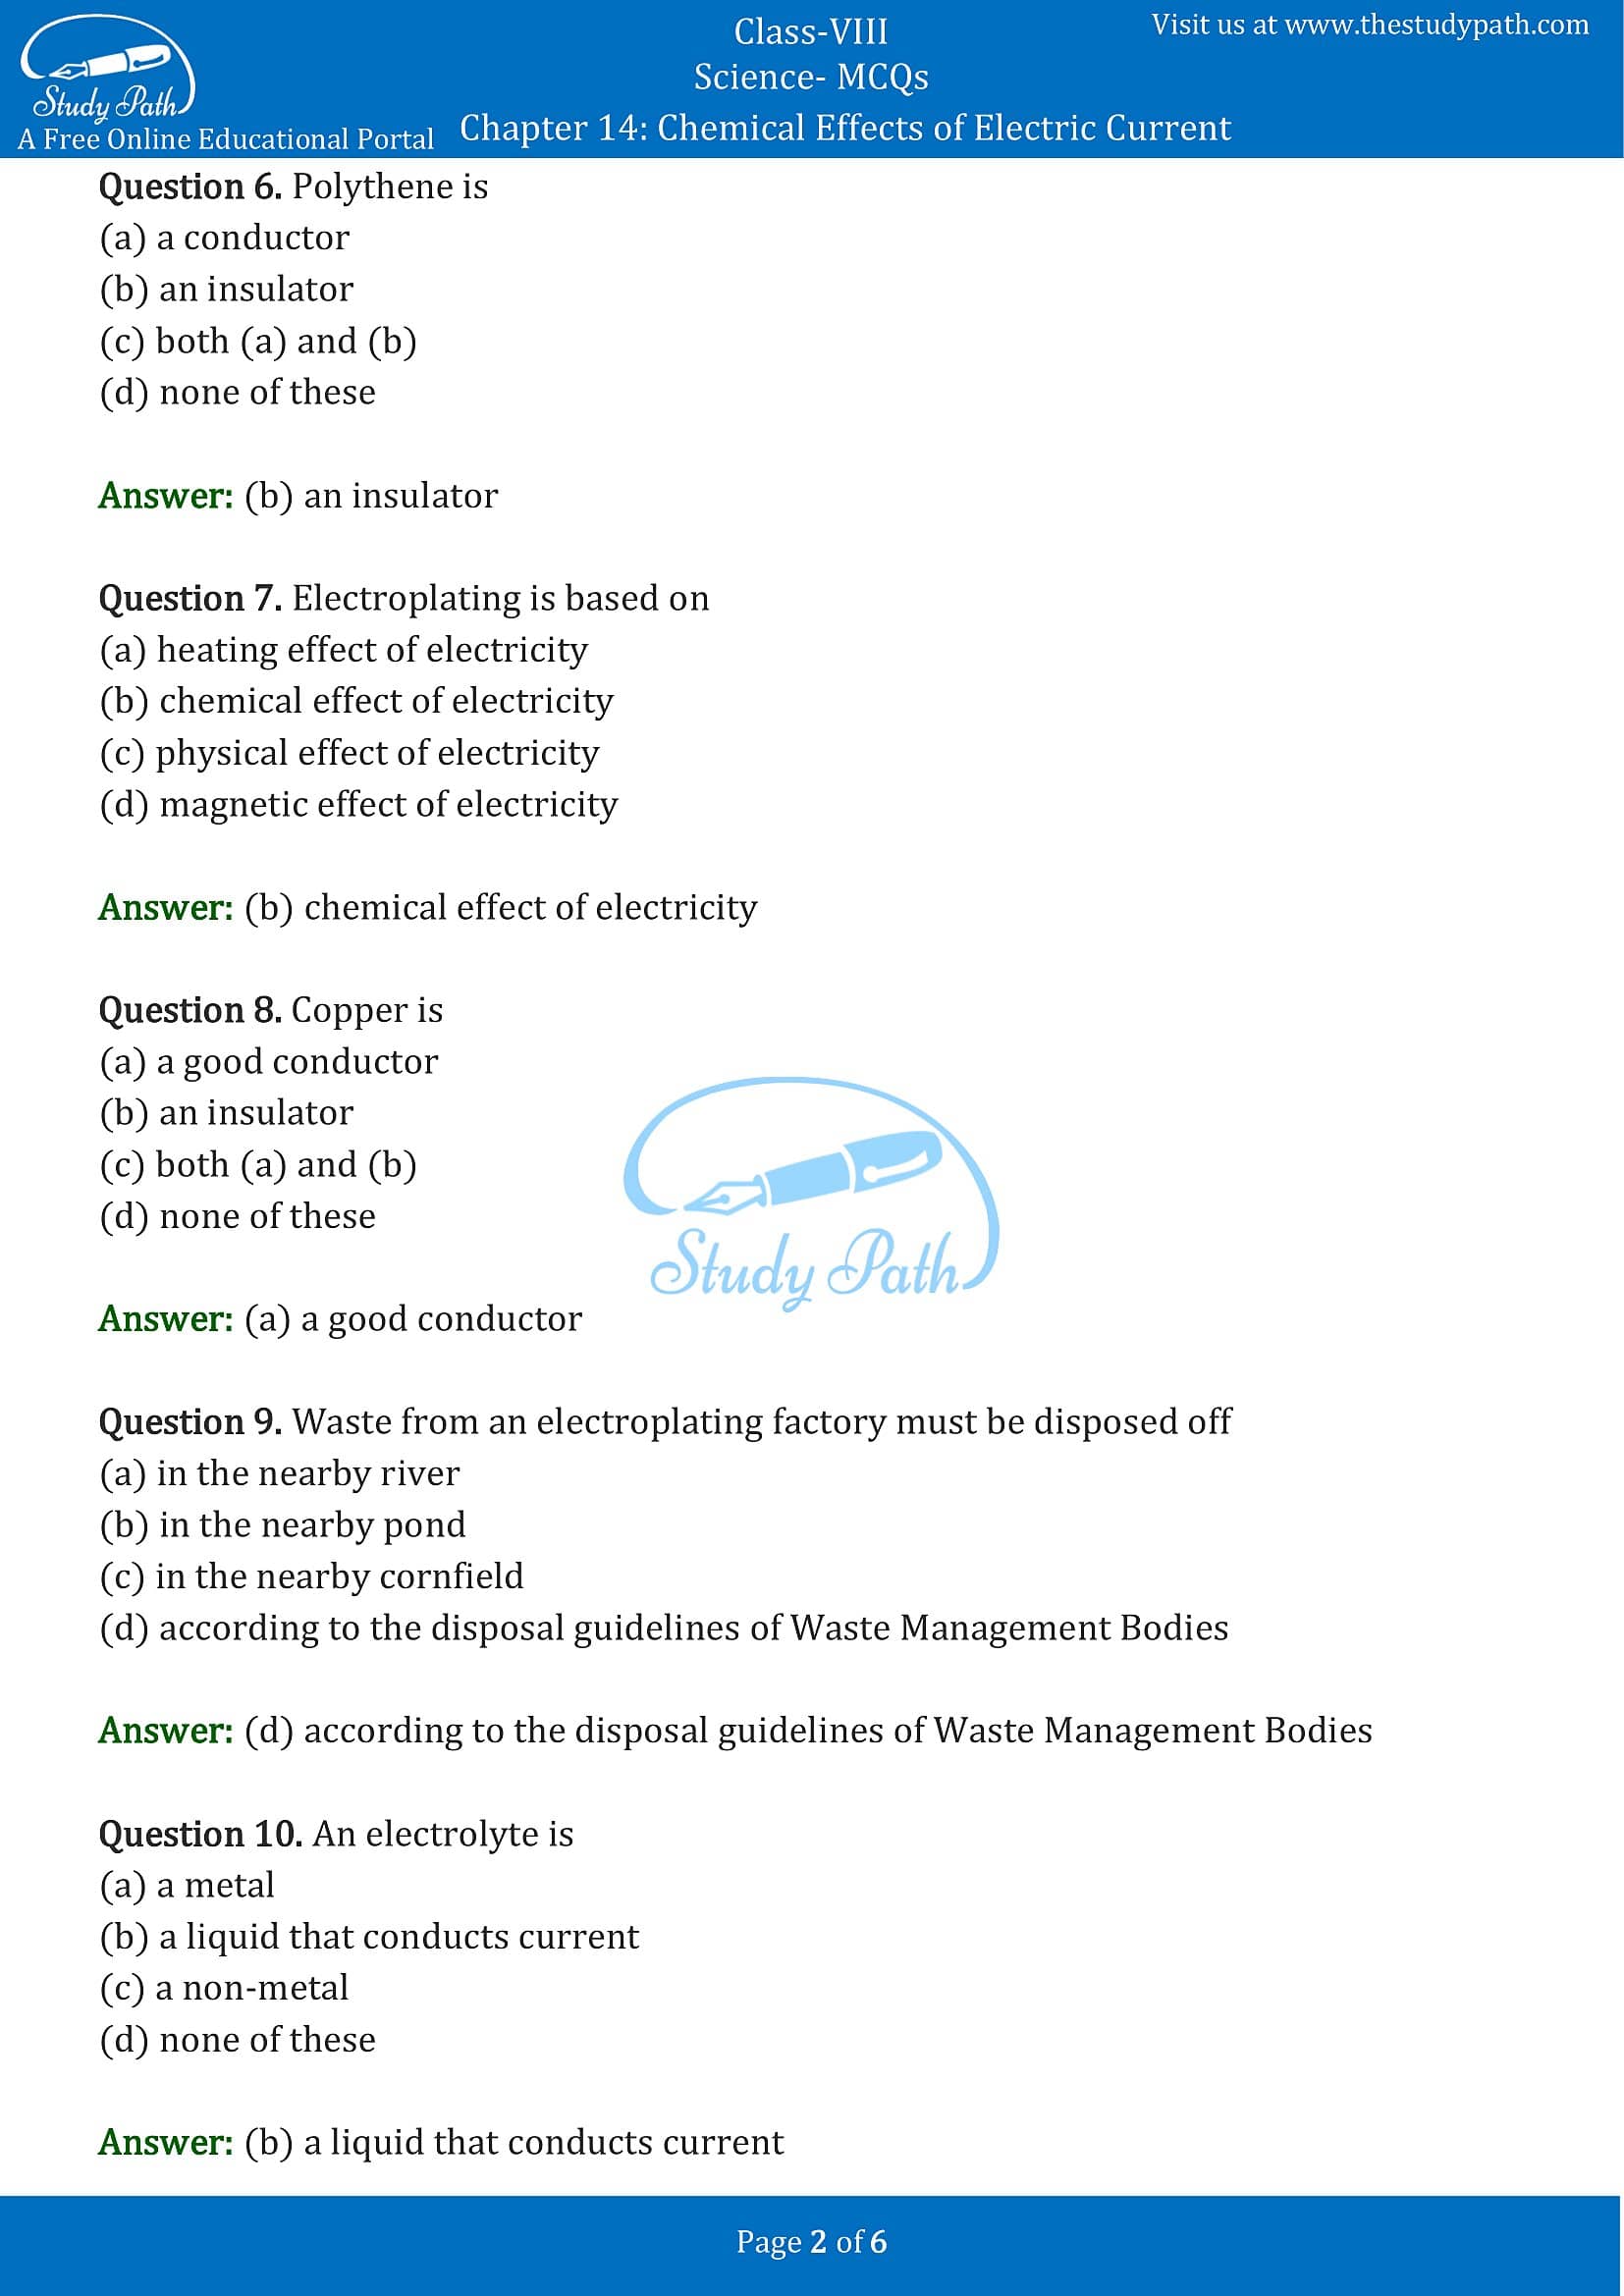 MCQ Questions for Class 8 Science Chapter 14 Chemical Effects of Electric Current PDF -2